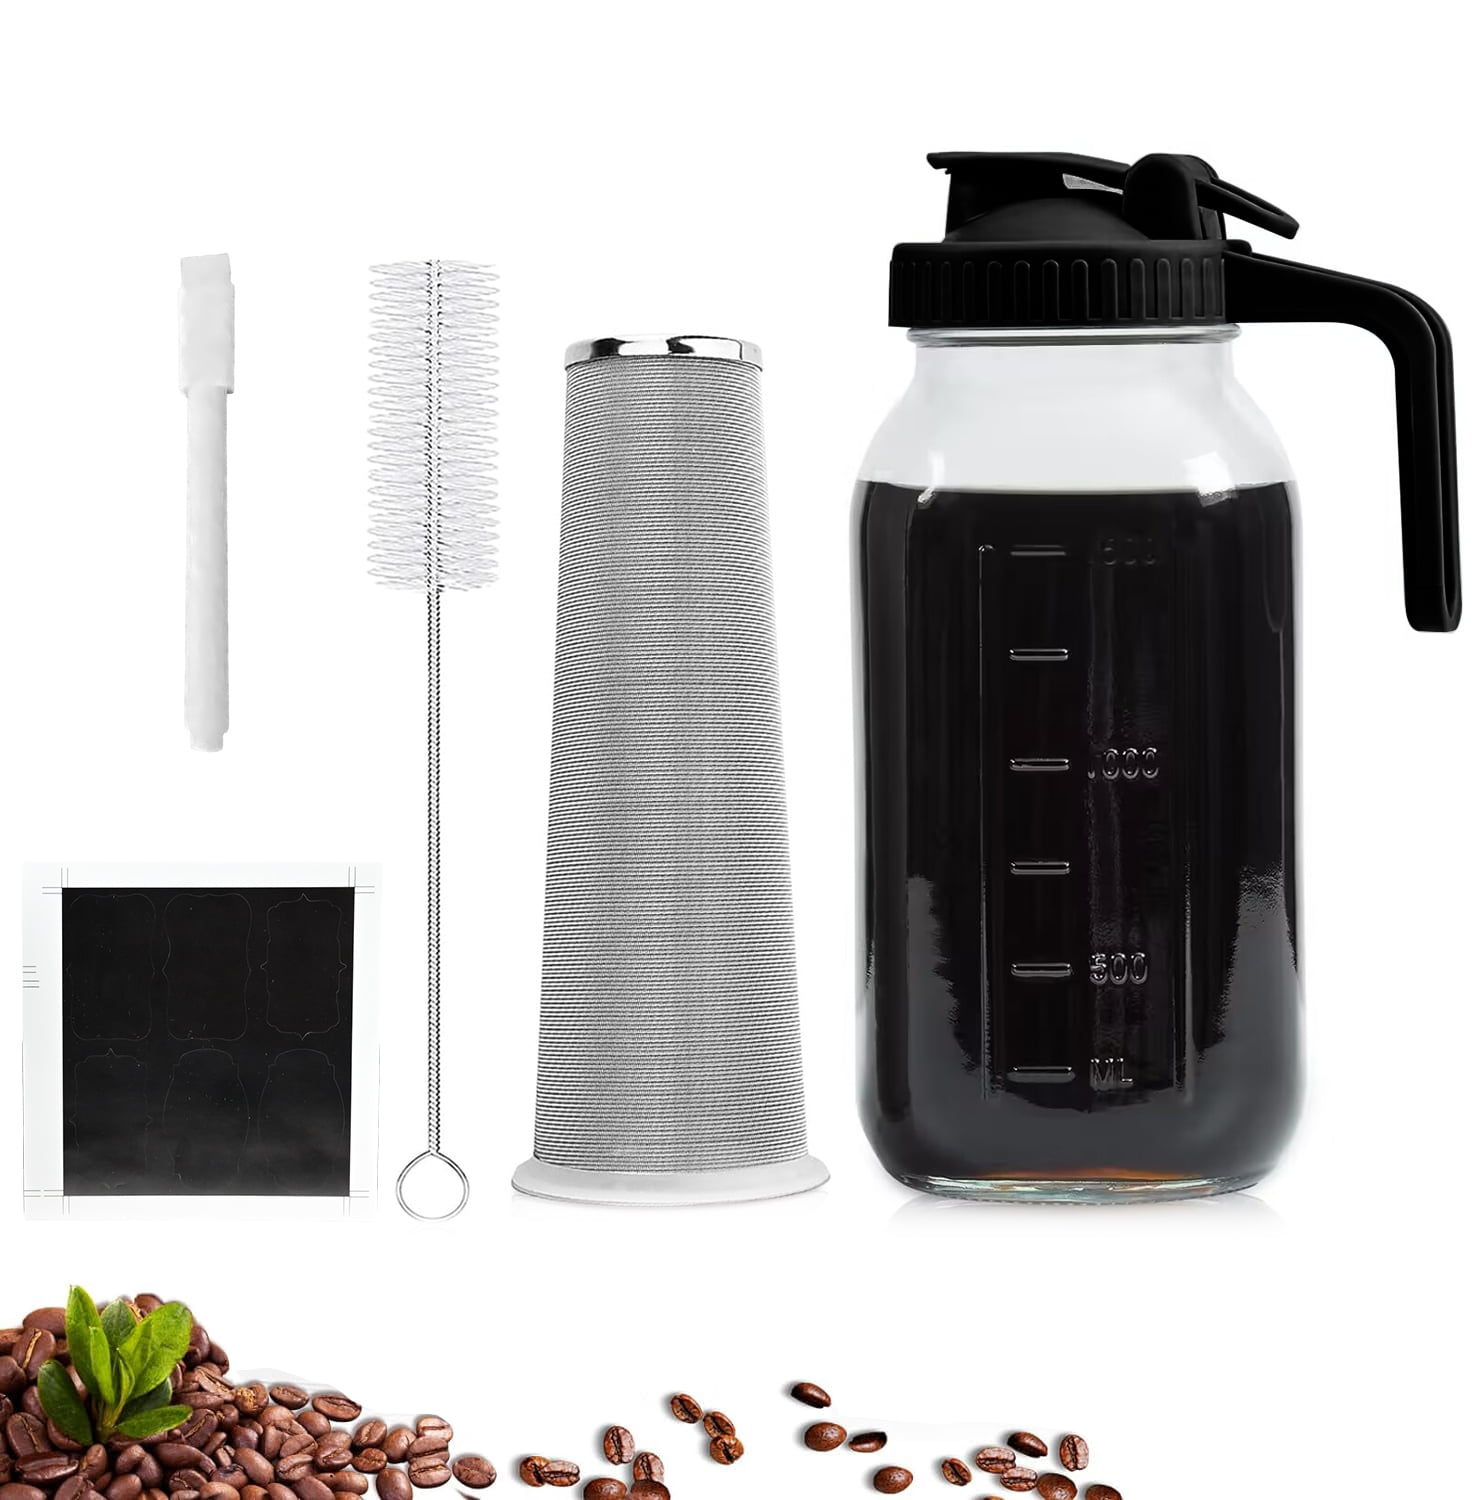 64oz Glass Cold Brew Pitcher with Flip Lid - Charlie Royal